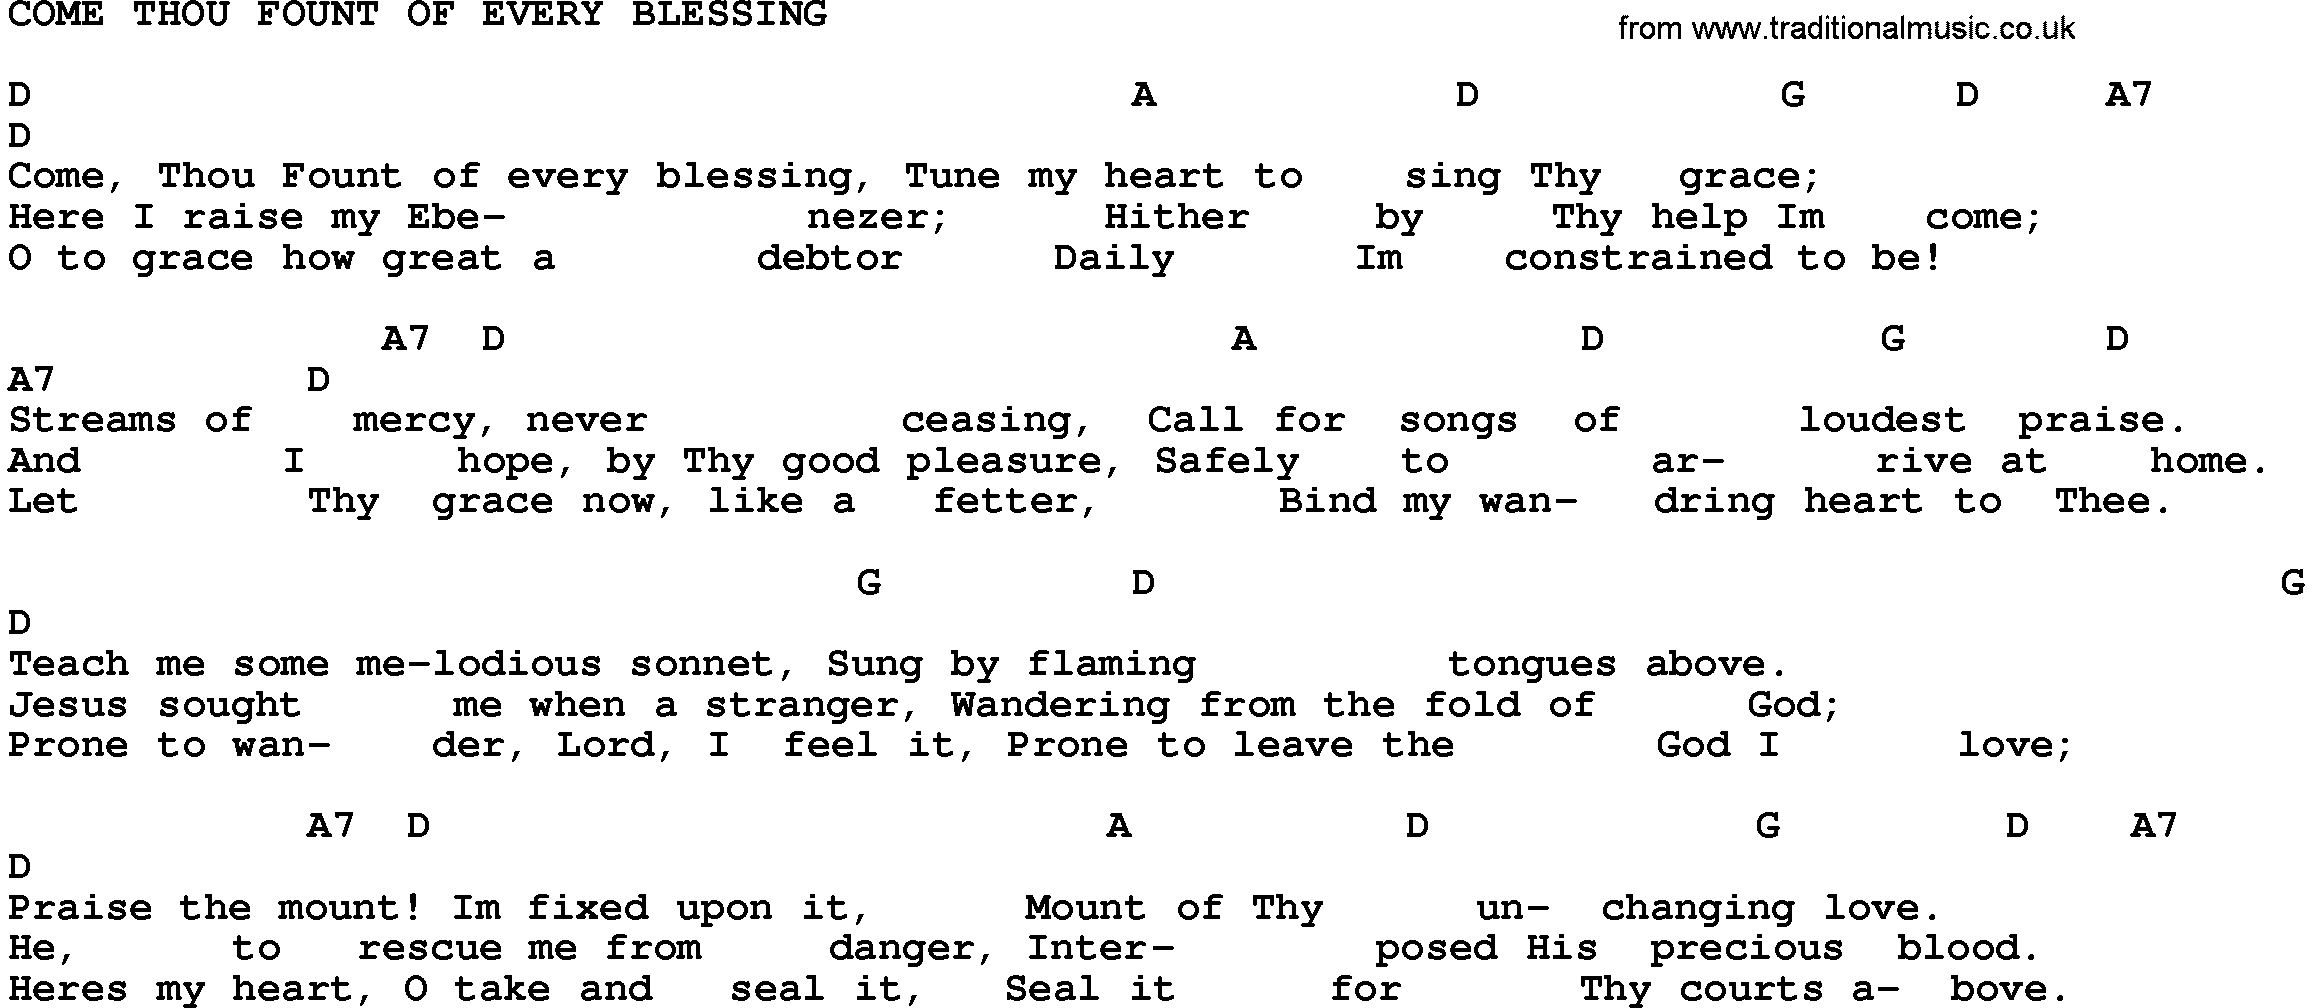 Come Thou Fount Chords Gospel Song Come Thou Fount Of Every Blessing Trad Lyrics And Chords